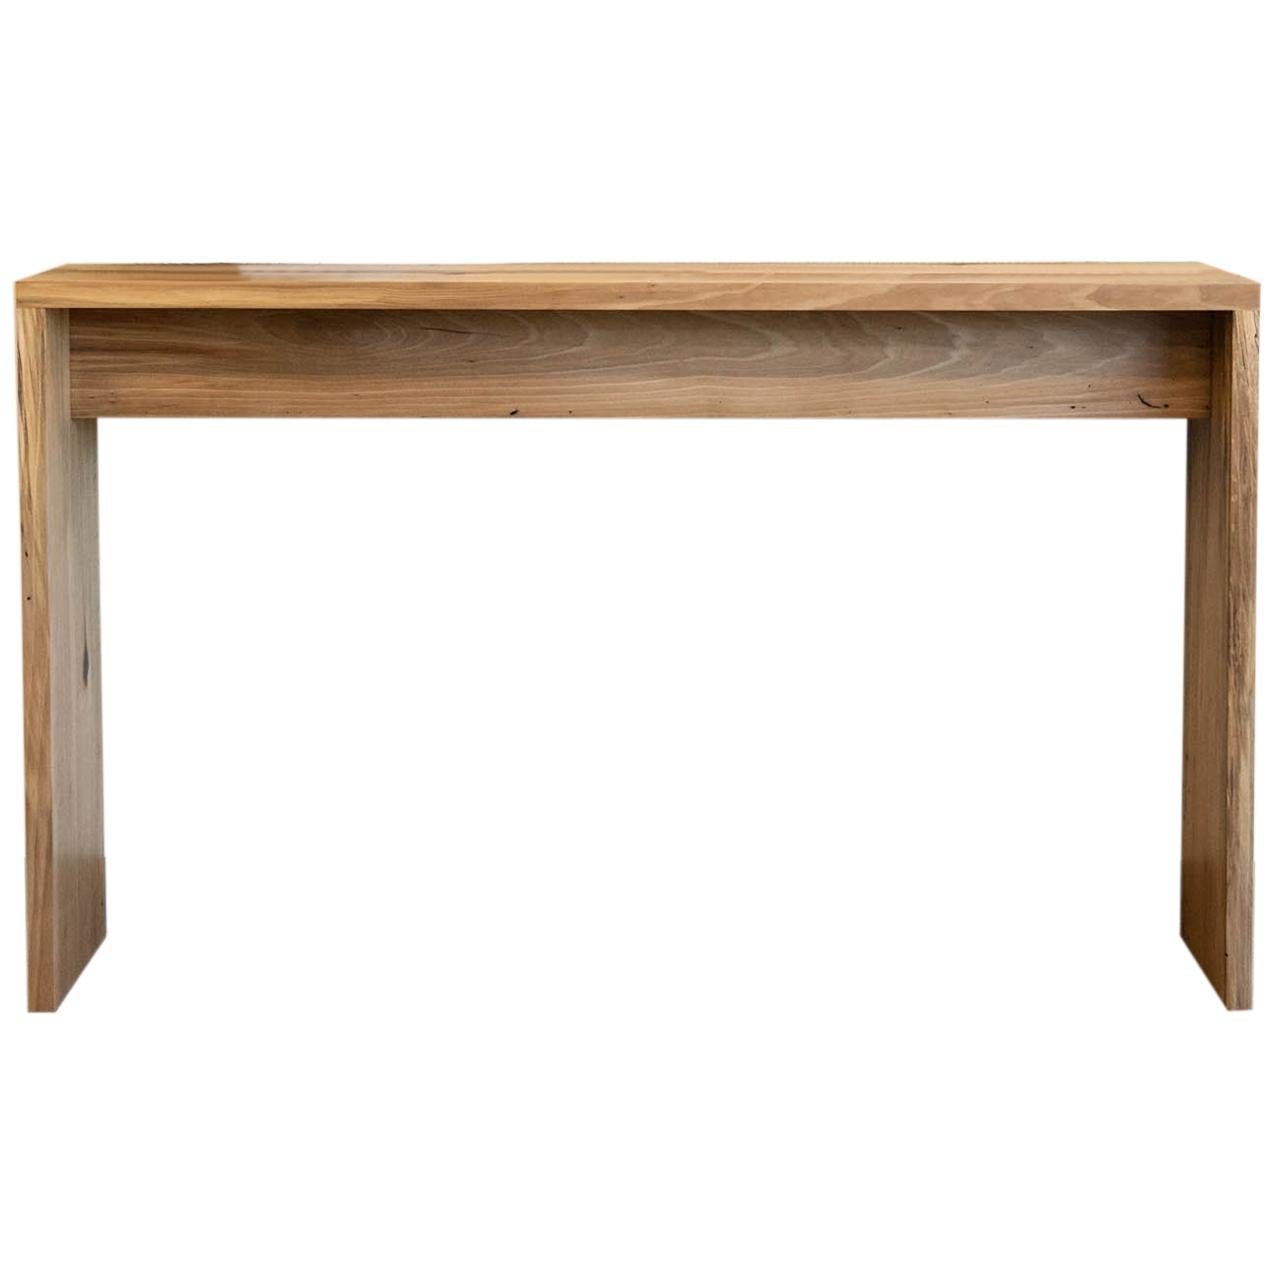 Narrow Console Table in "Satin Walnut" Wood with Box Joints by Alabama Sawyer For Sale